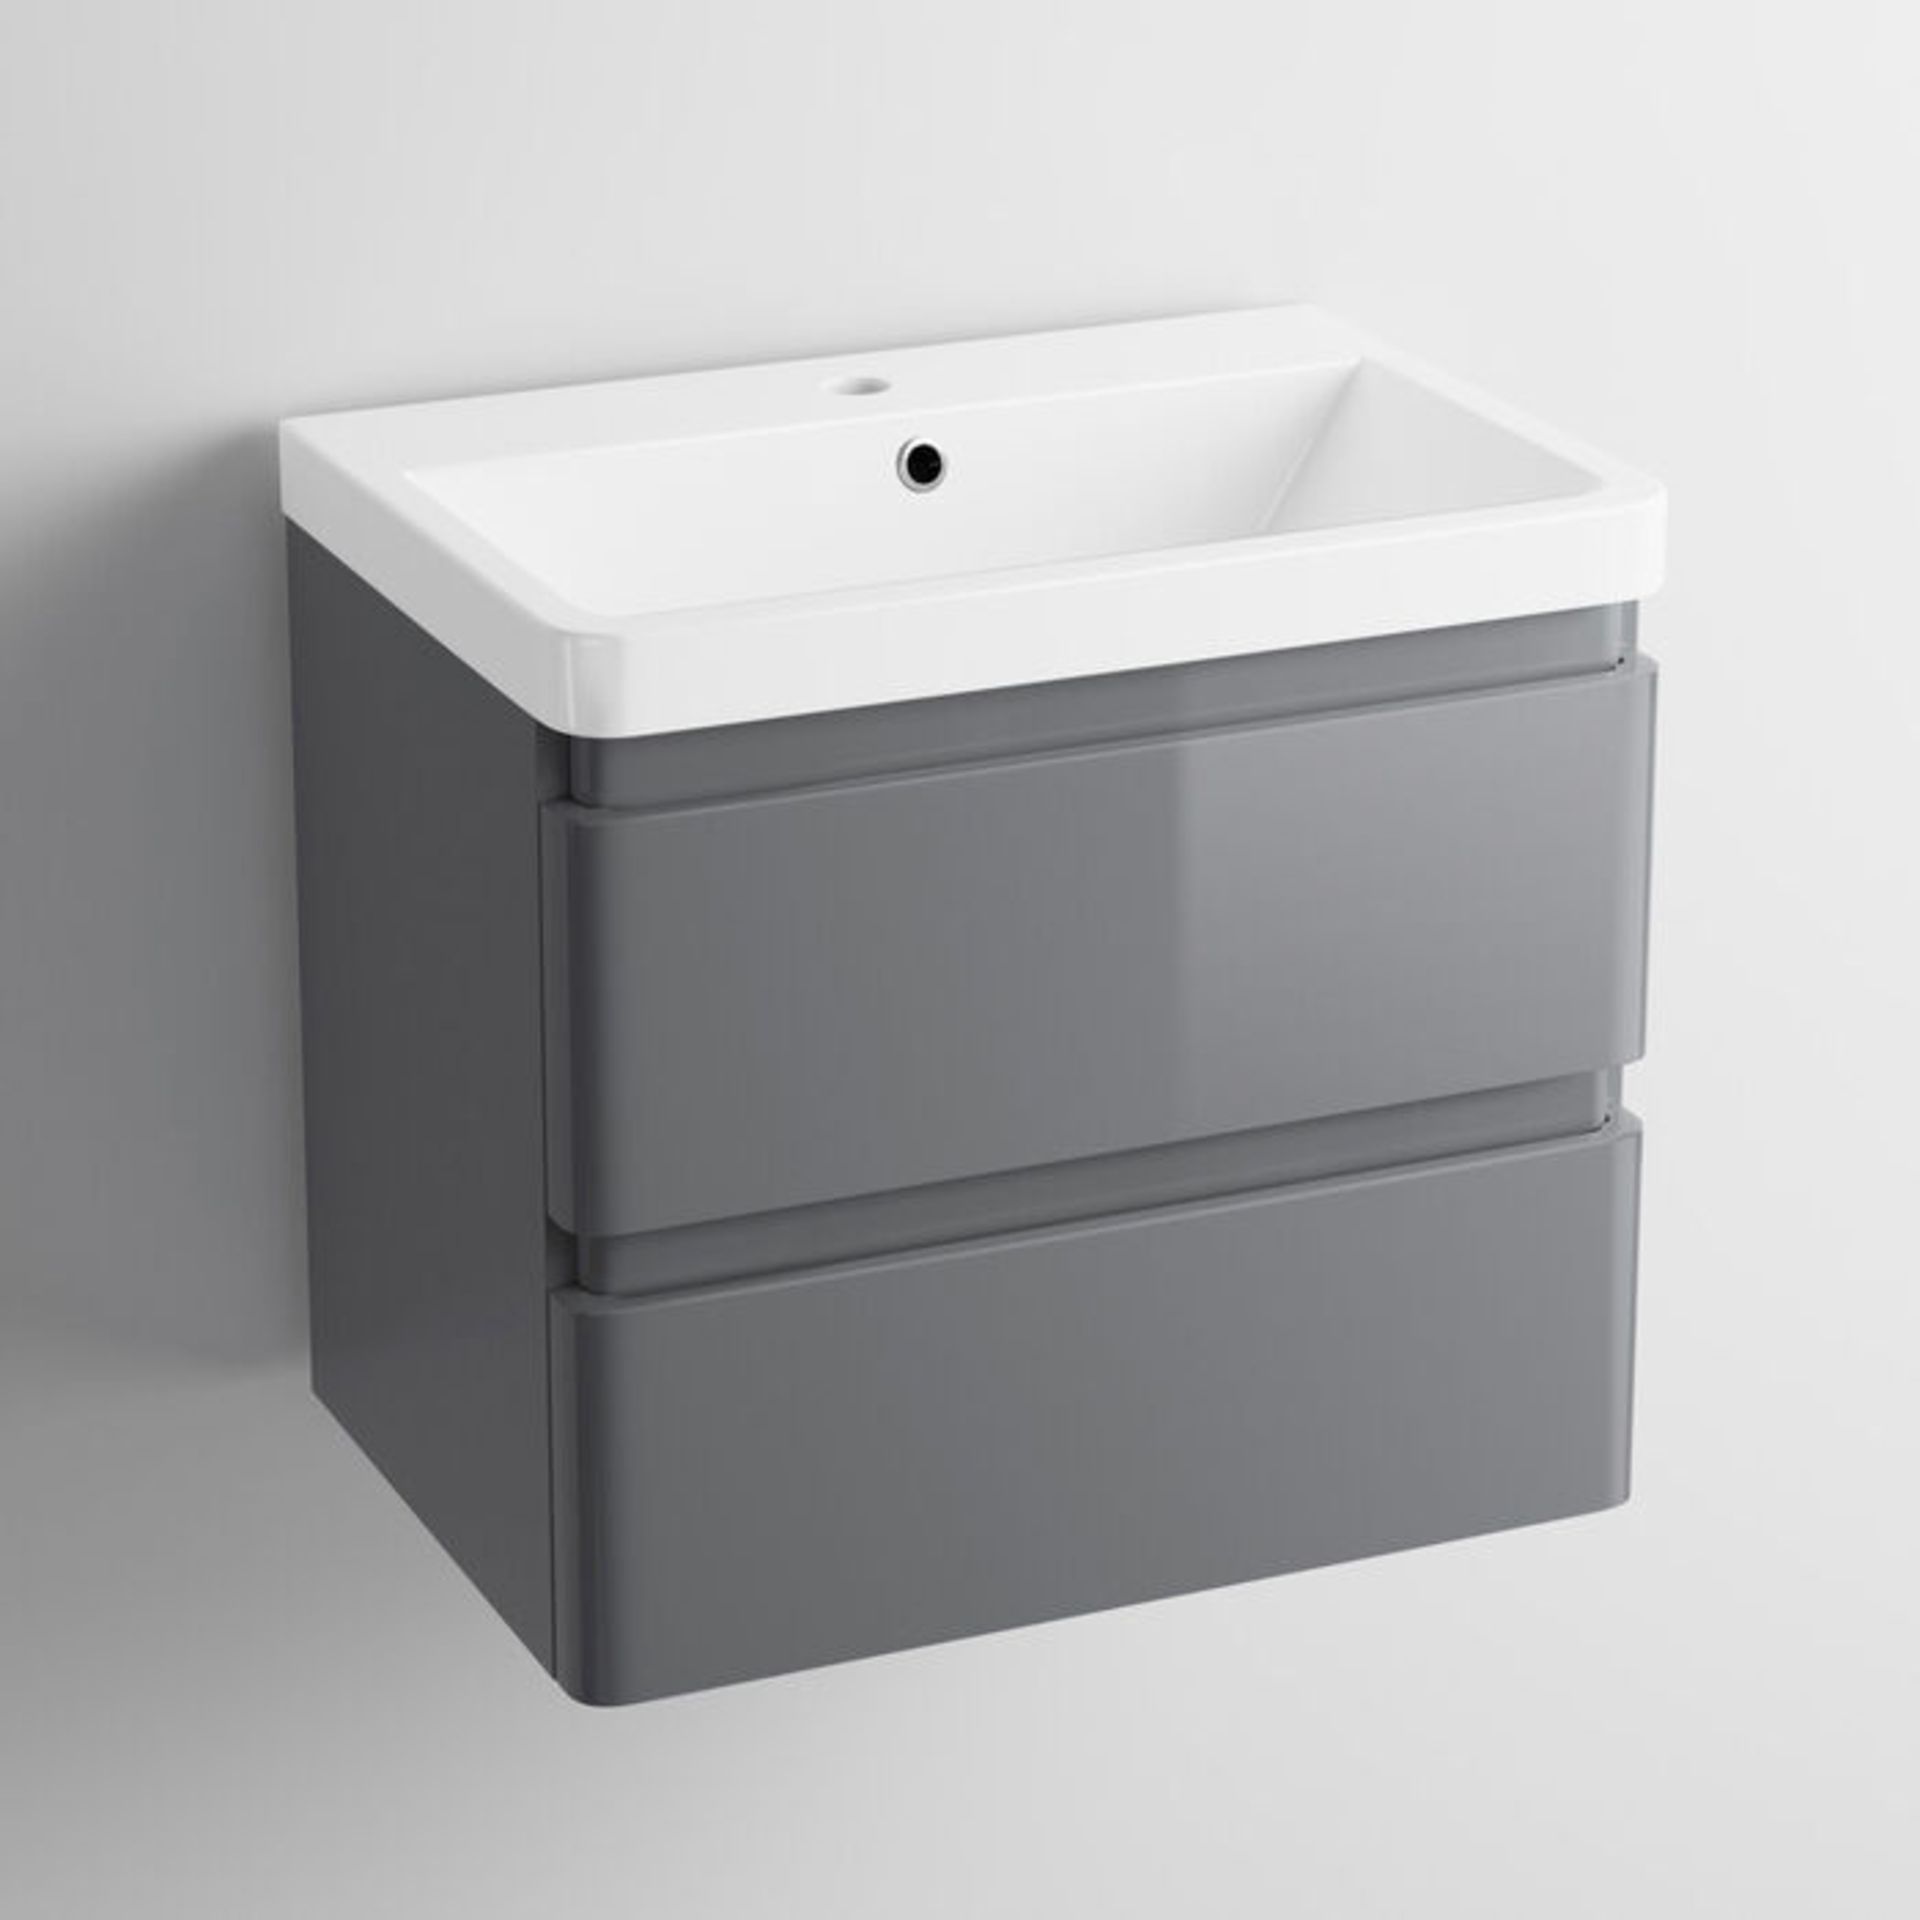 (DD29) 600mm Denver Gloss Grey Built In Sink Drawer Unit - Wall Hung. RRP £499.99. Comes com... - Image 4 of 4